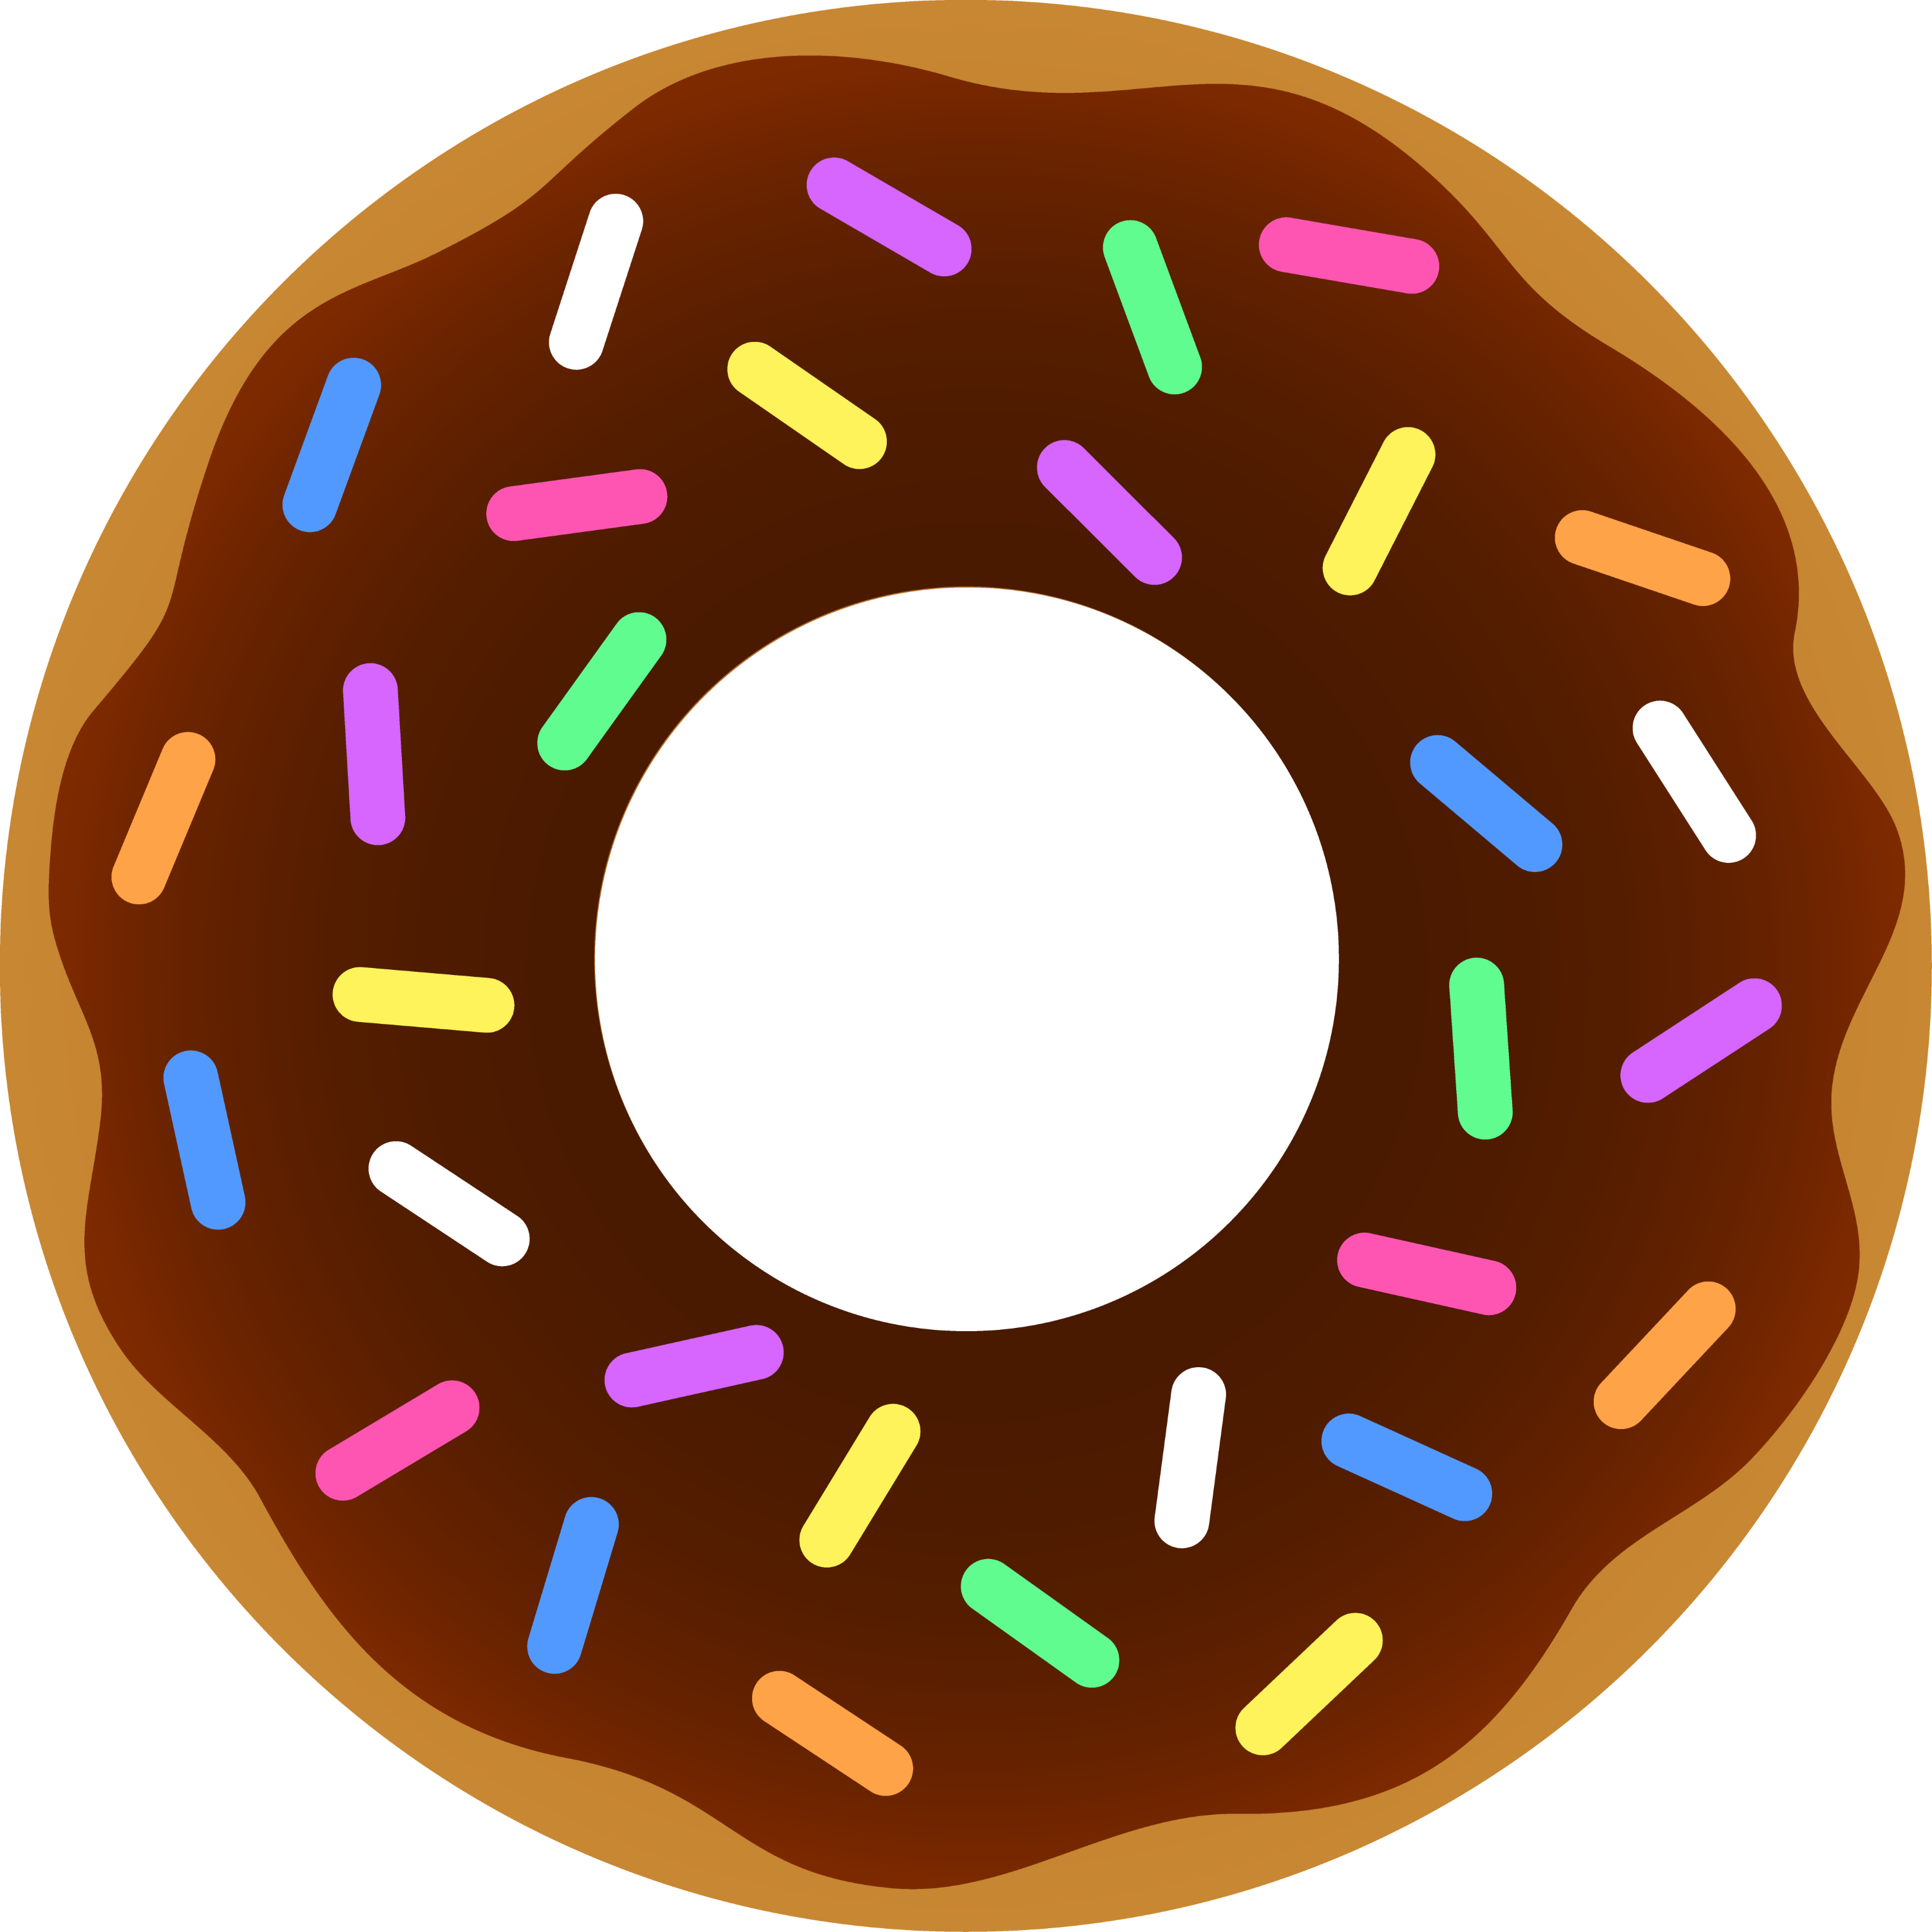 Chocolate Donut With Sprinkles Free Clip Art